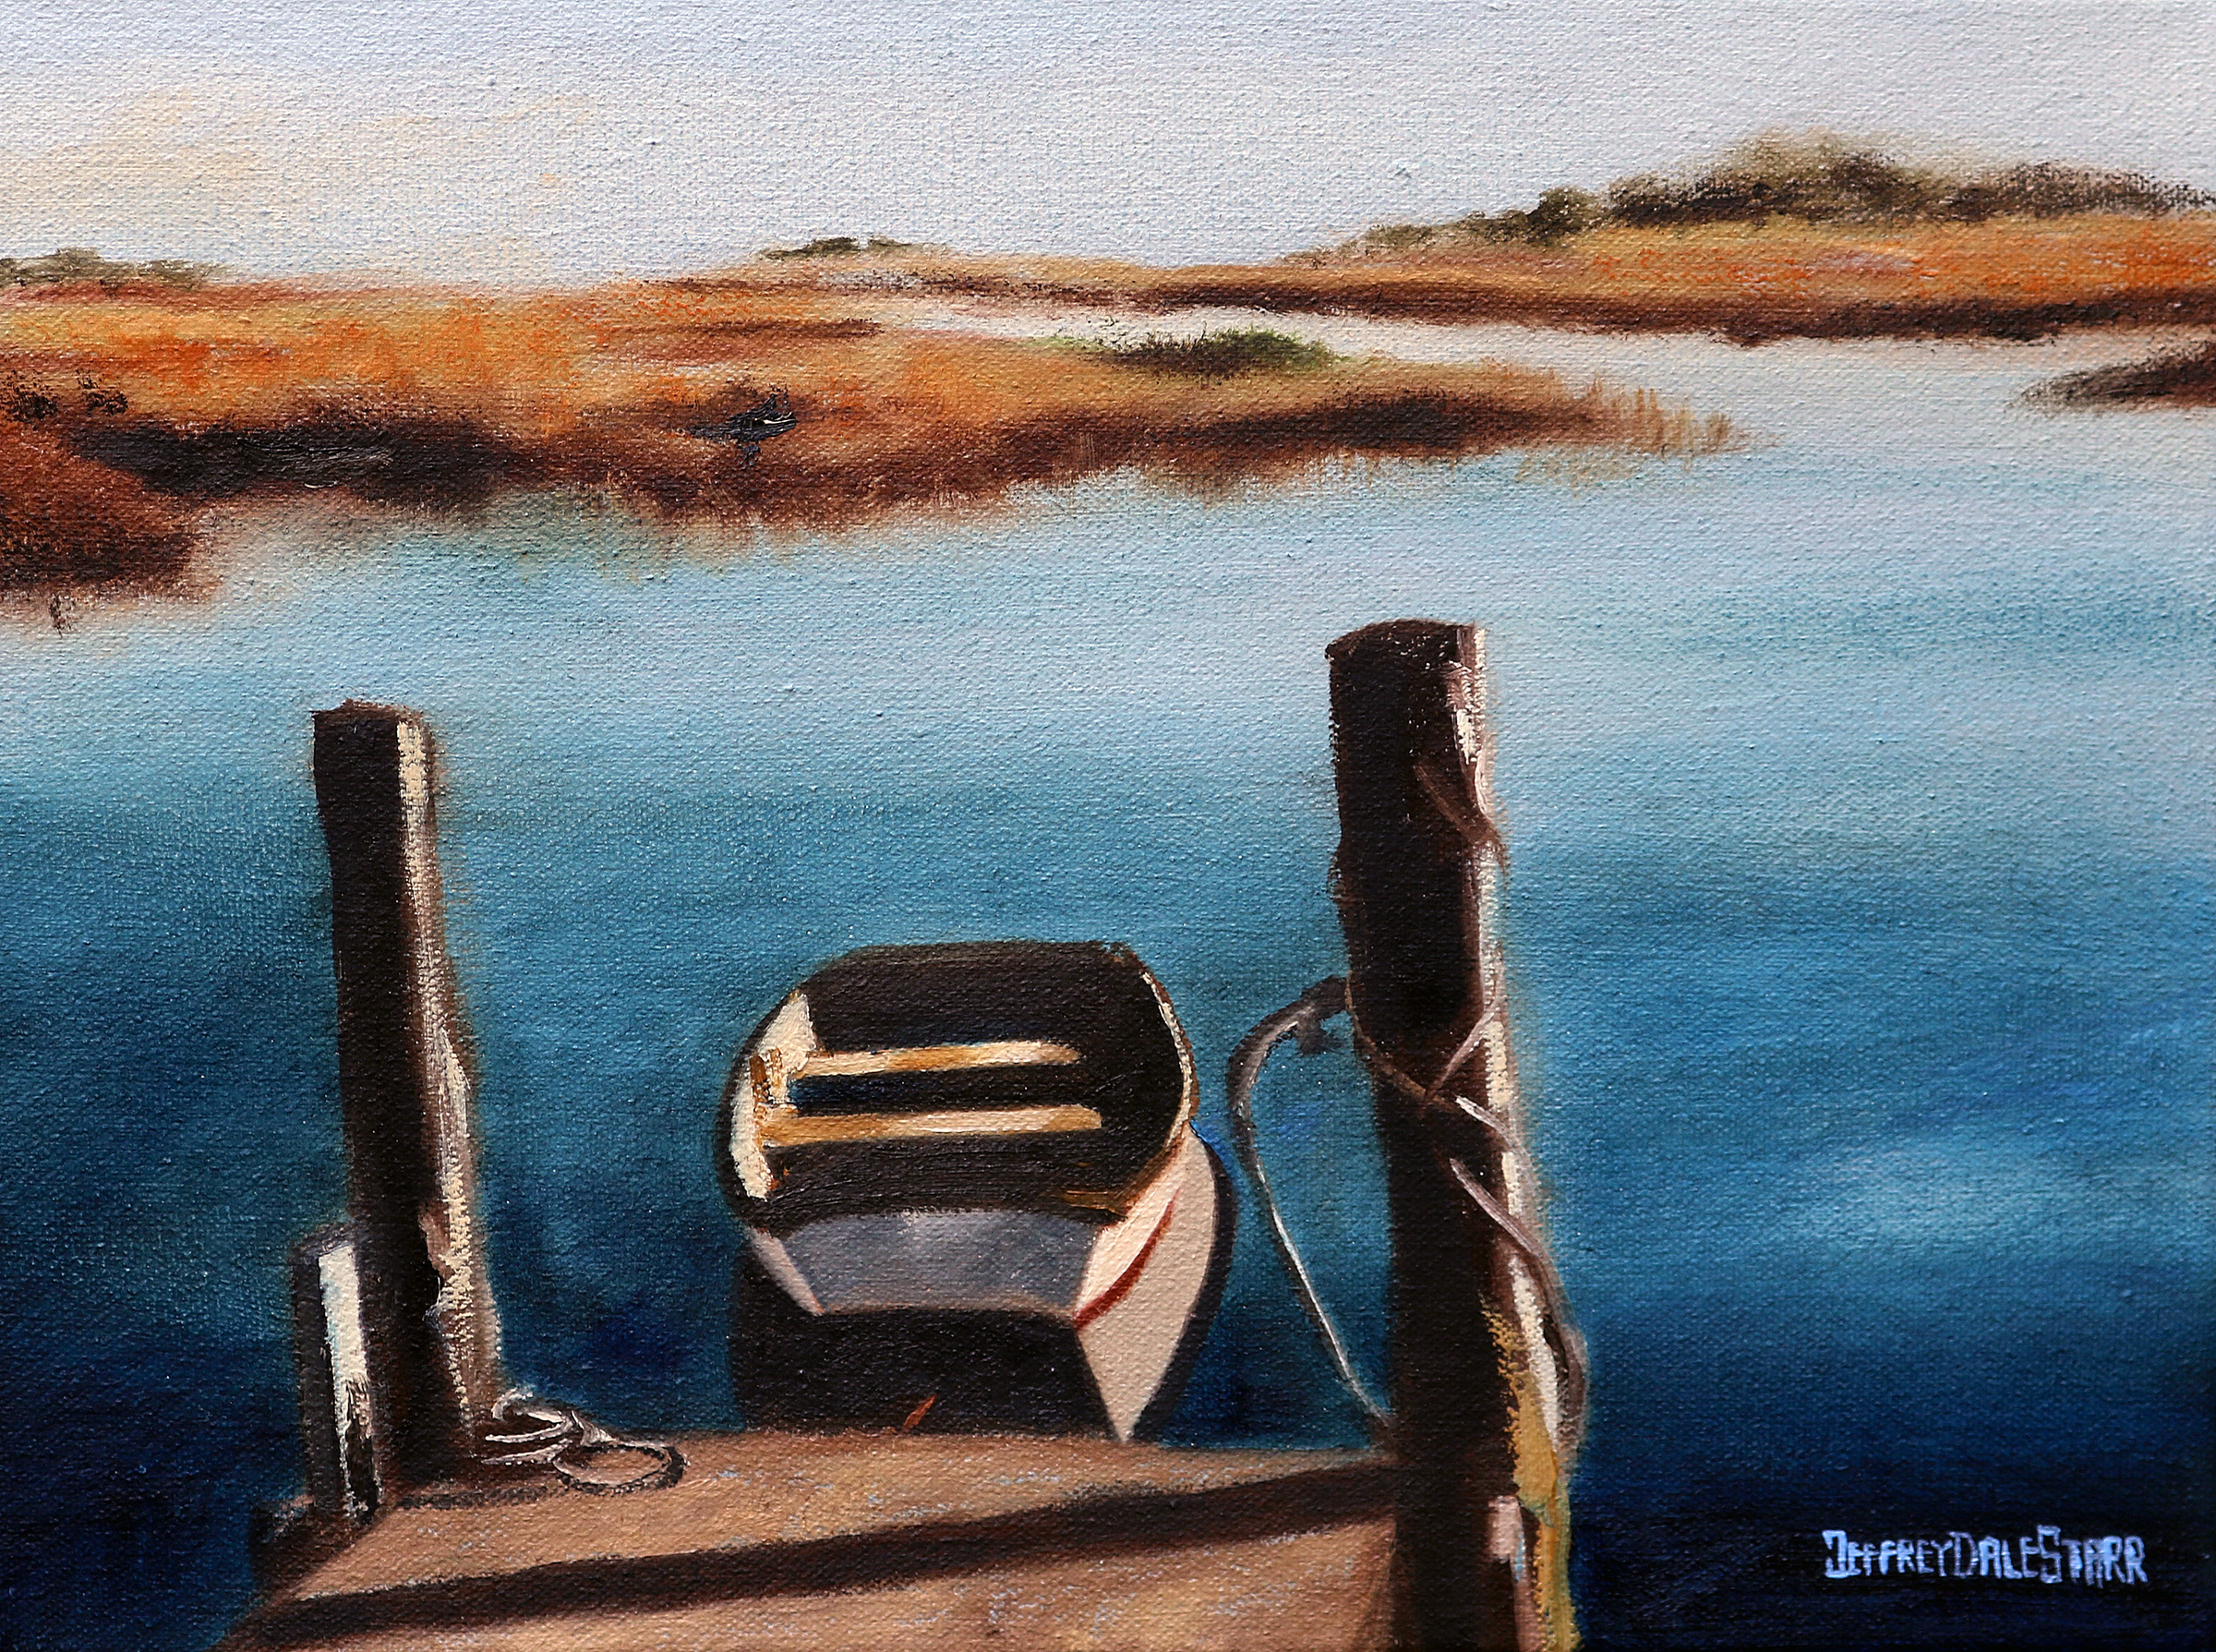 Oil painting "The Lonely Little Boat" by Jeffrey Dale Starr